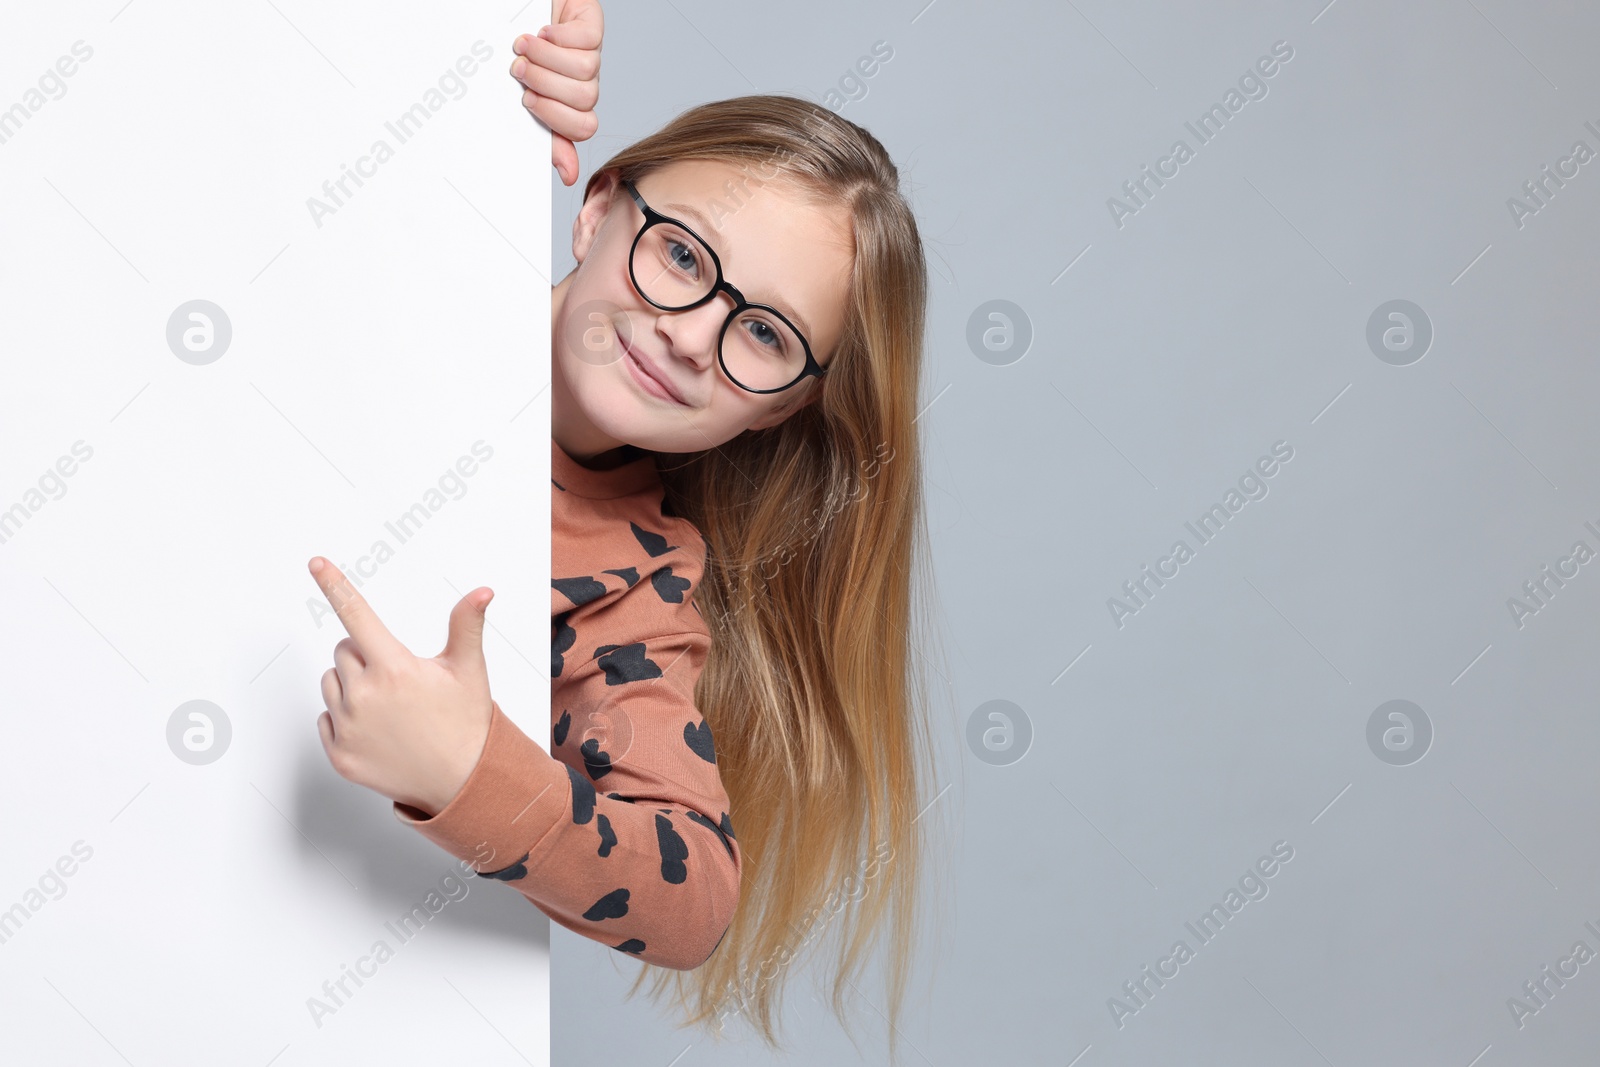 Photo of Cute girl looking out of placard and pointing on it against light grey background. Space for text